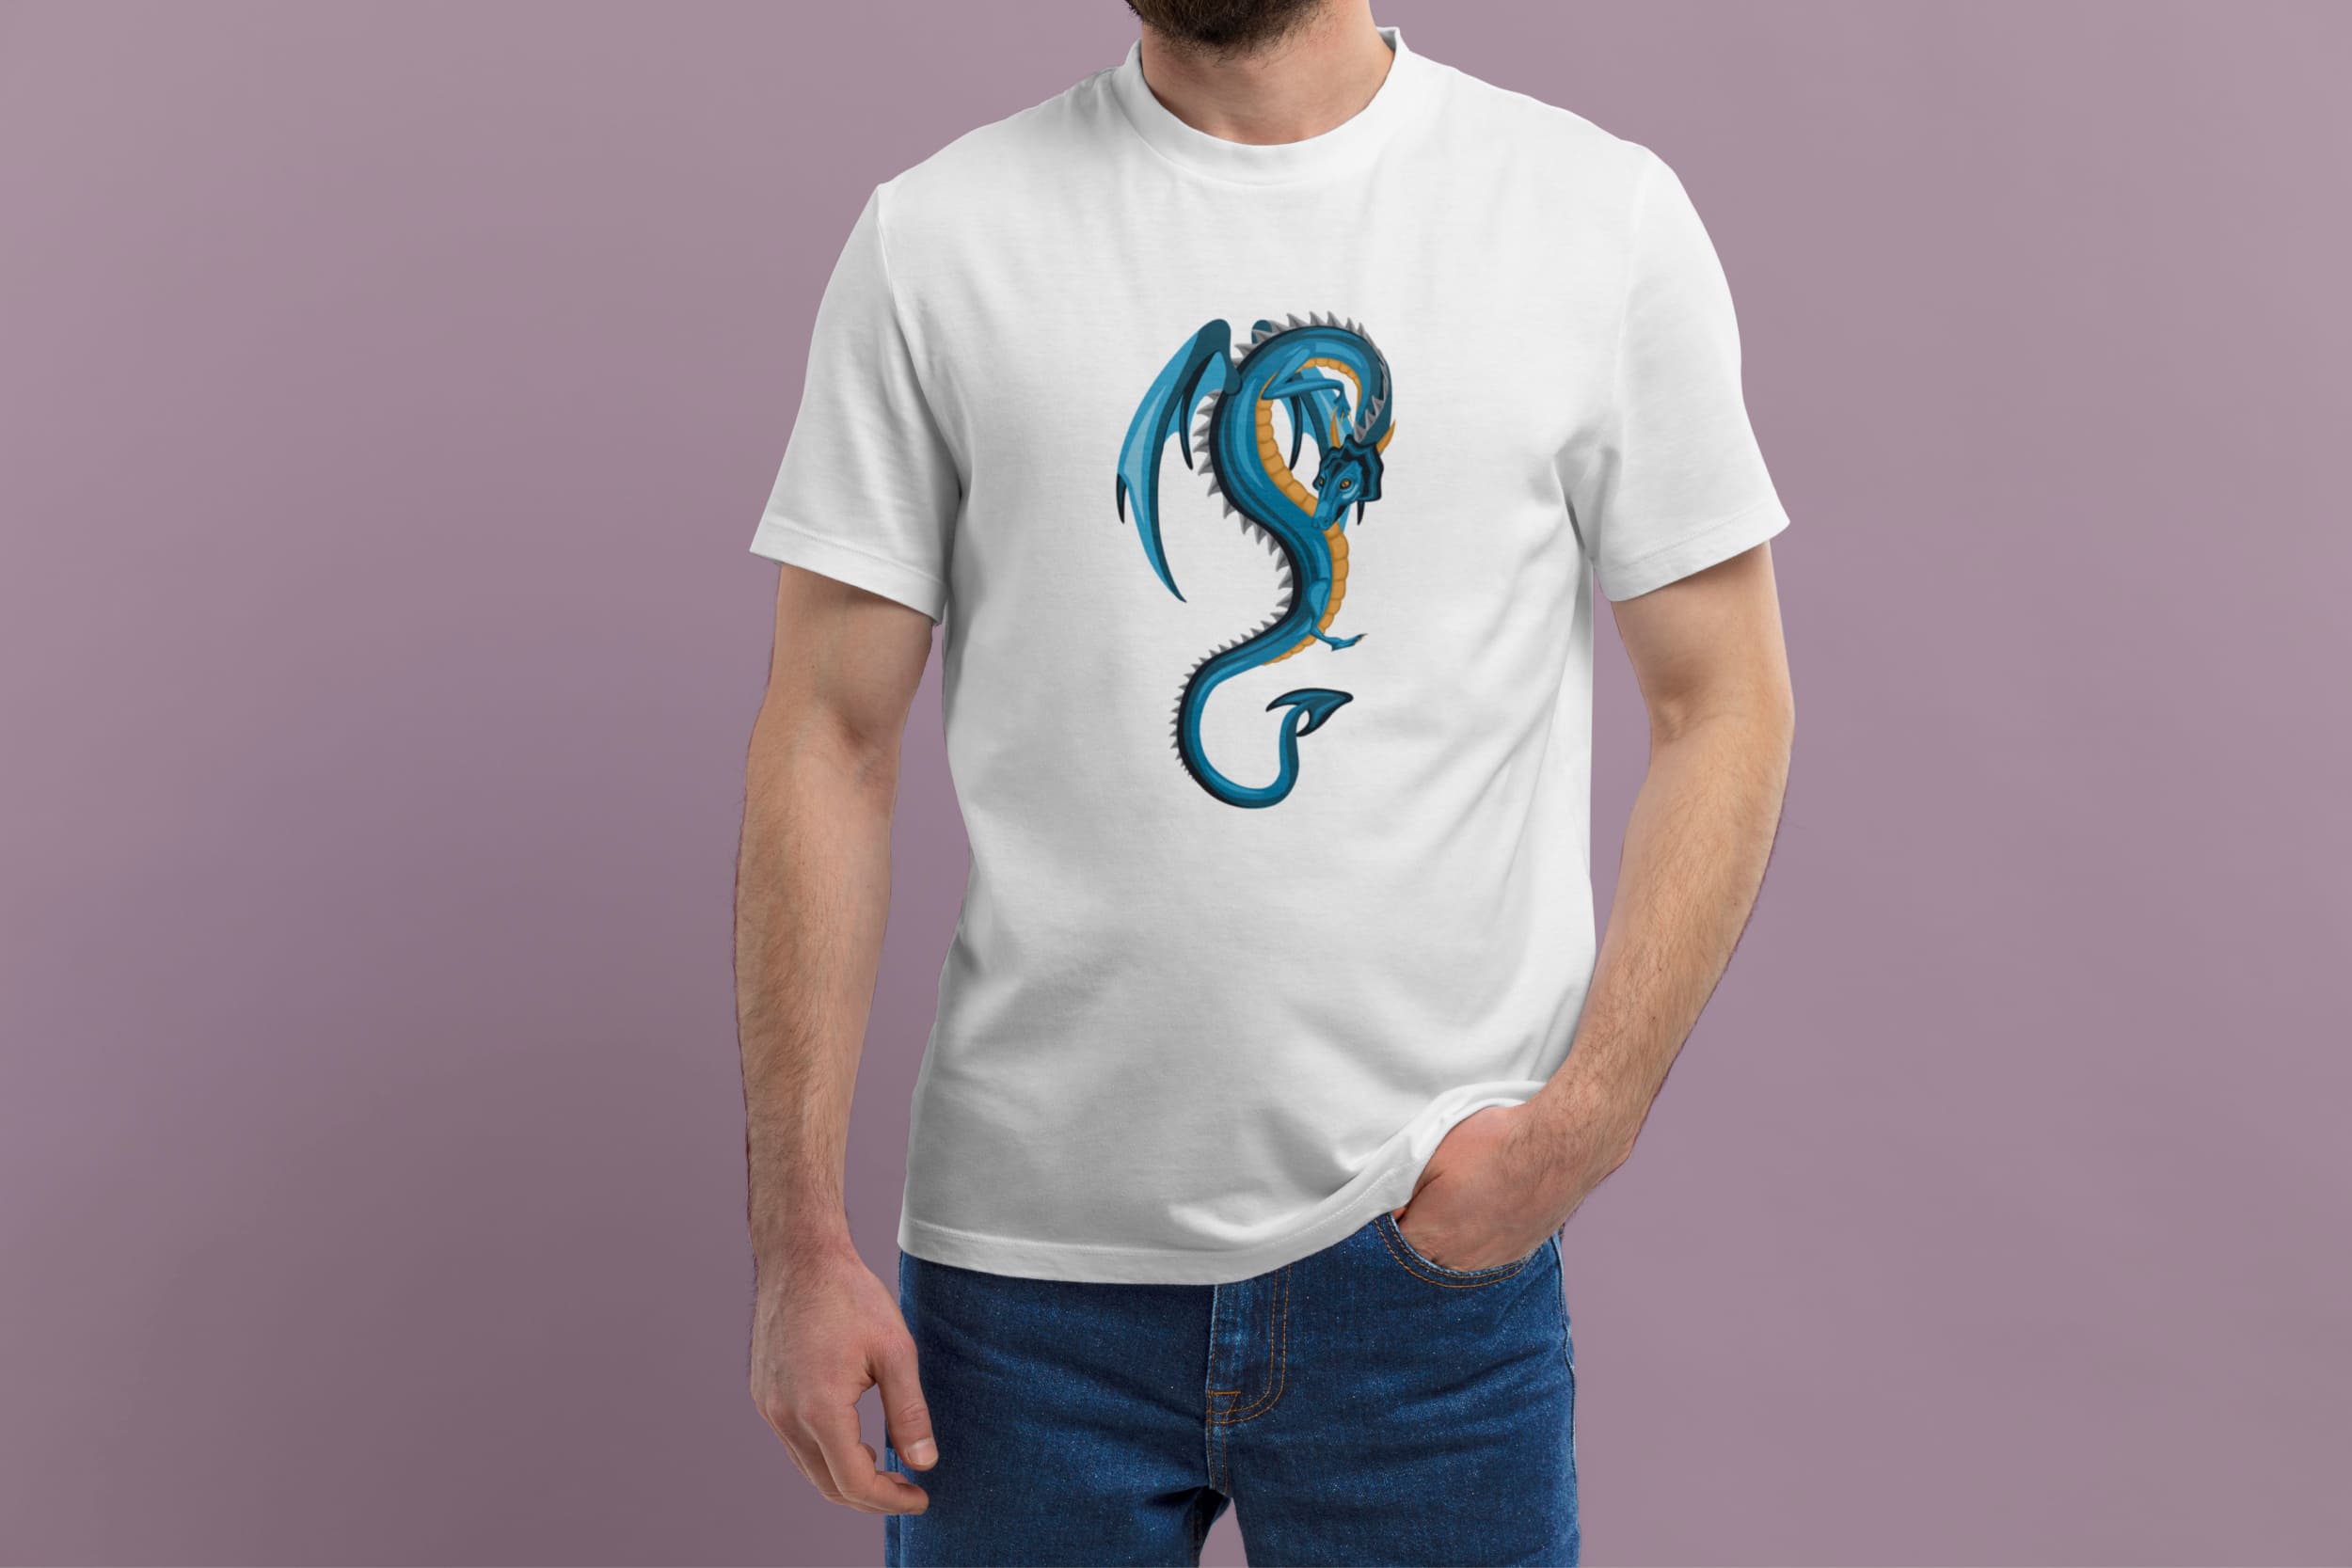 A white t-shirt with an image of a blue dragon on a man.